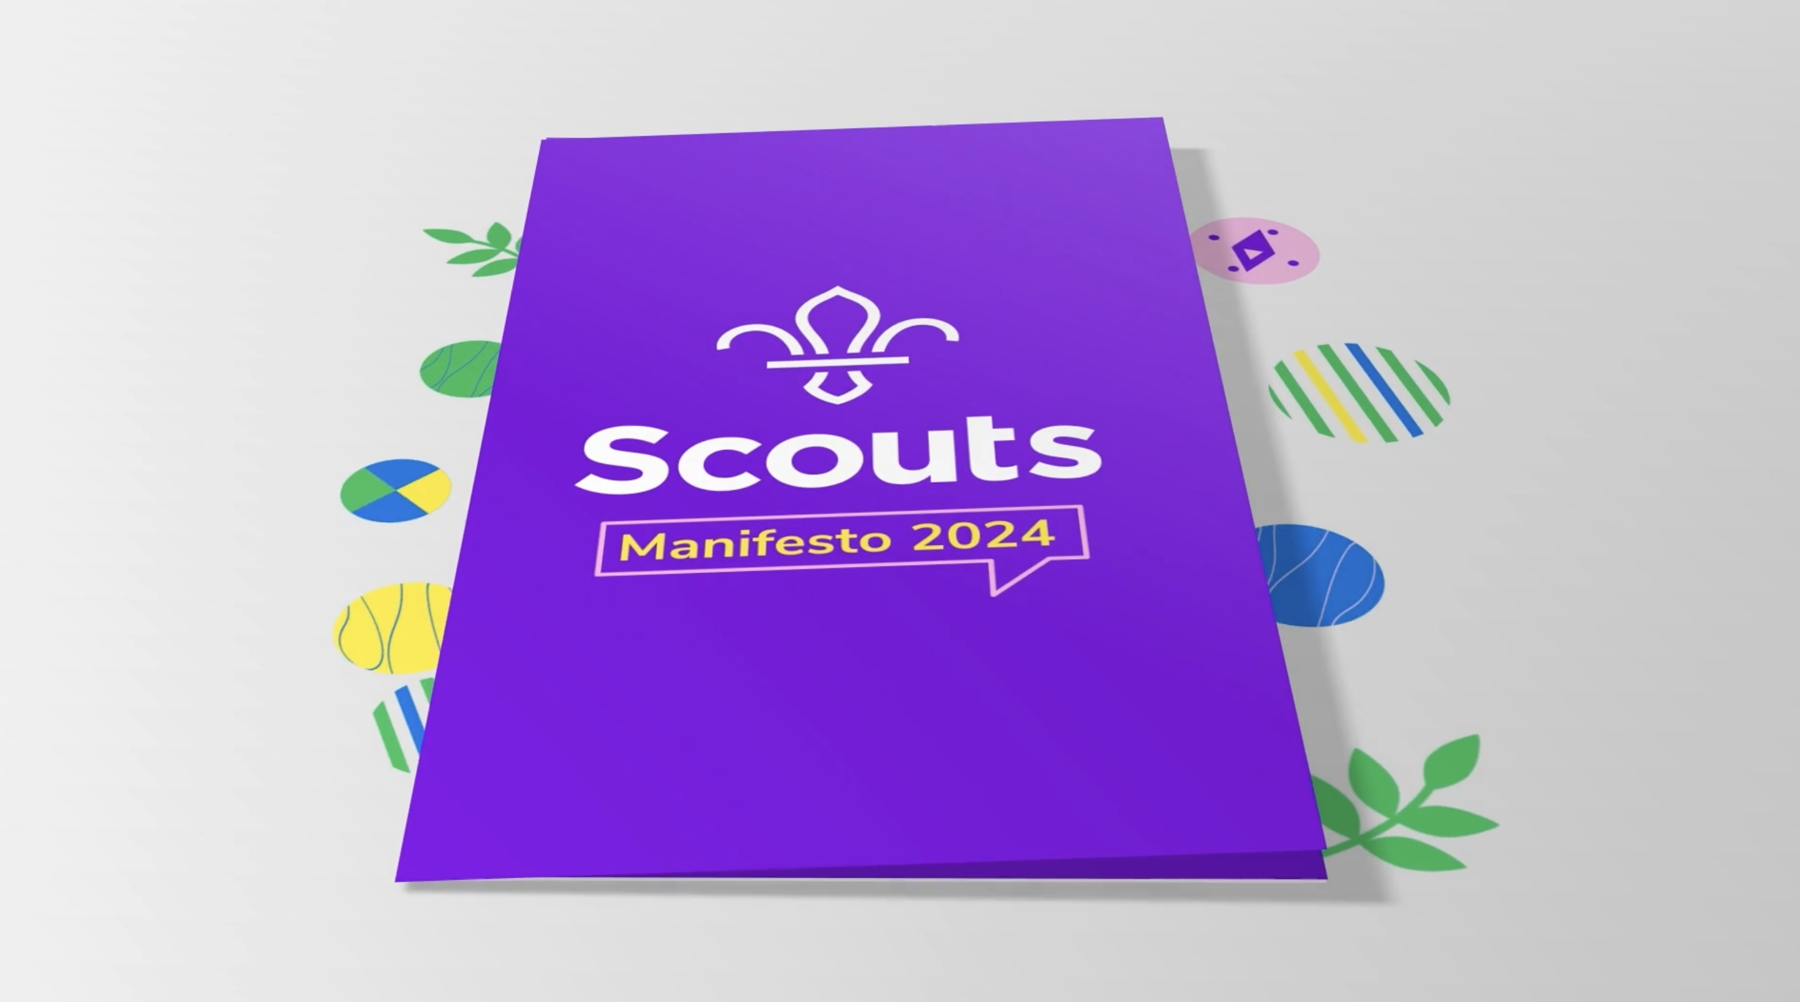 The photo shows a purple digital scrapbook with a white fleur-de-lis and the text 'Scouts' underneath. Below that it says 'Manifesto 2024'. Either side of the scrapbook are graphic pattern icons including leaves and circles.